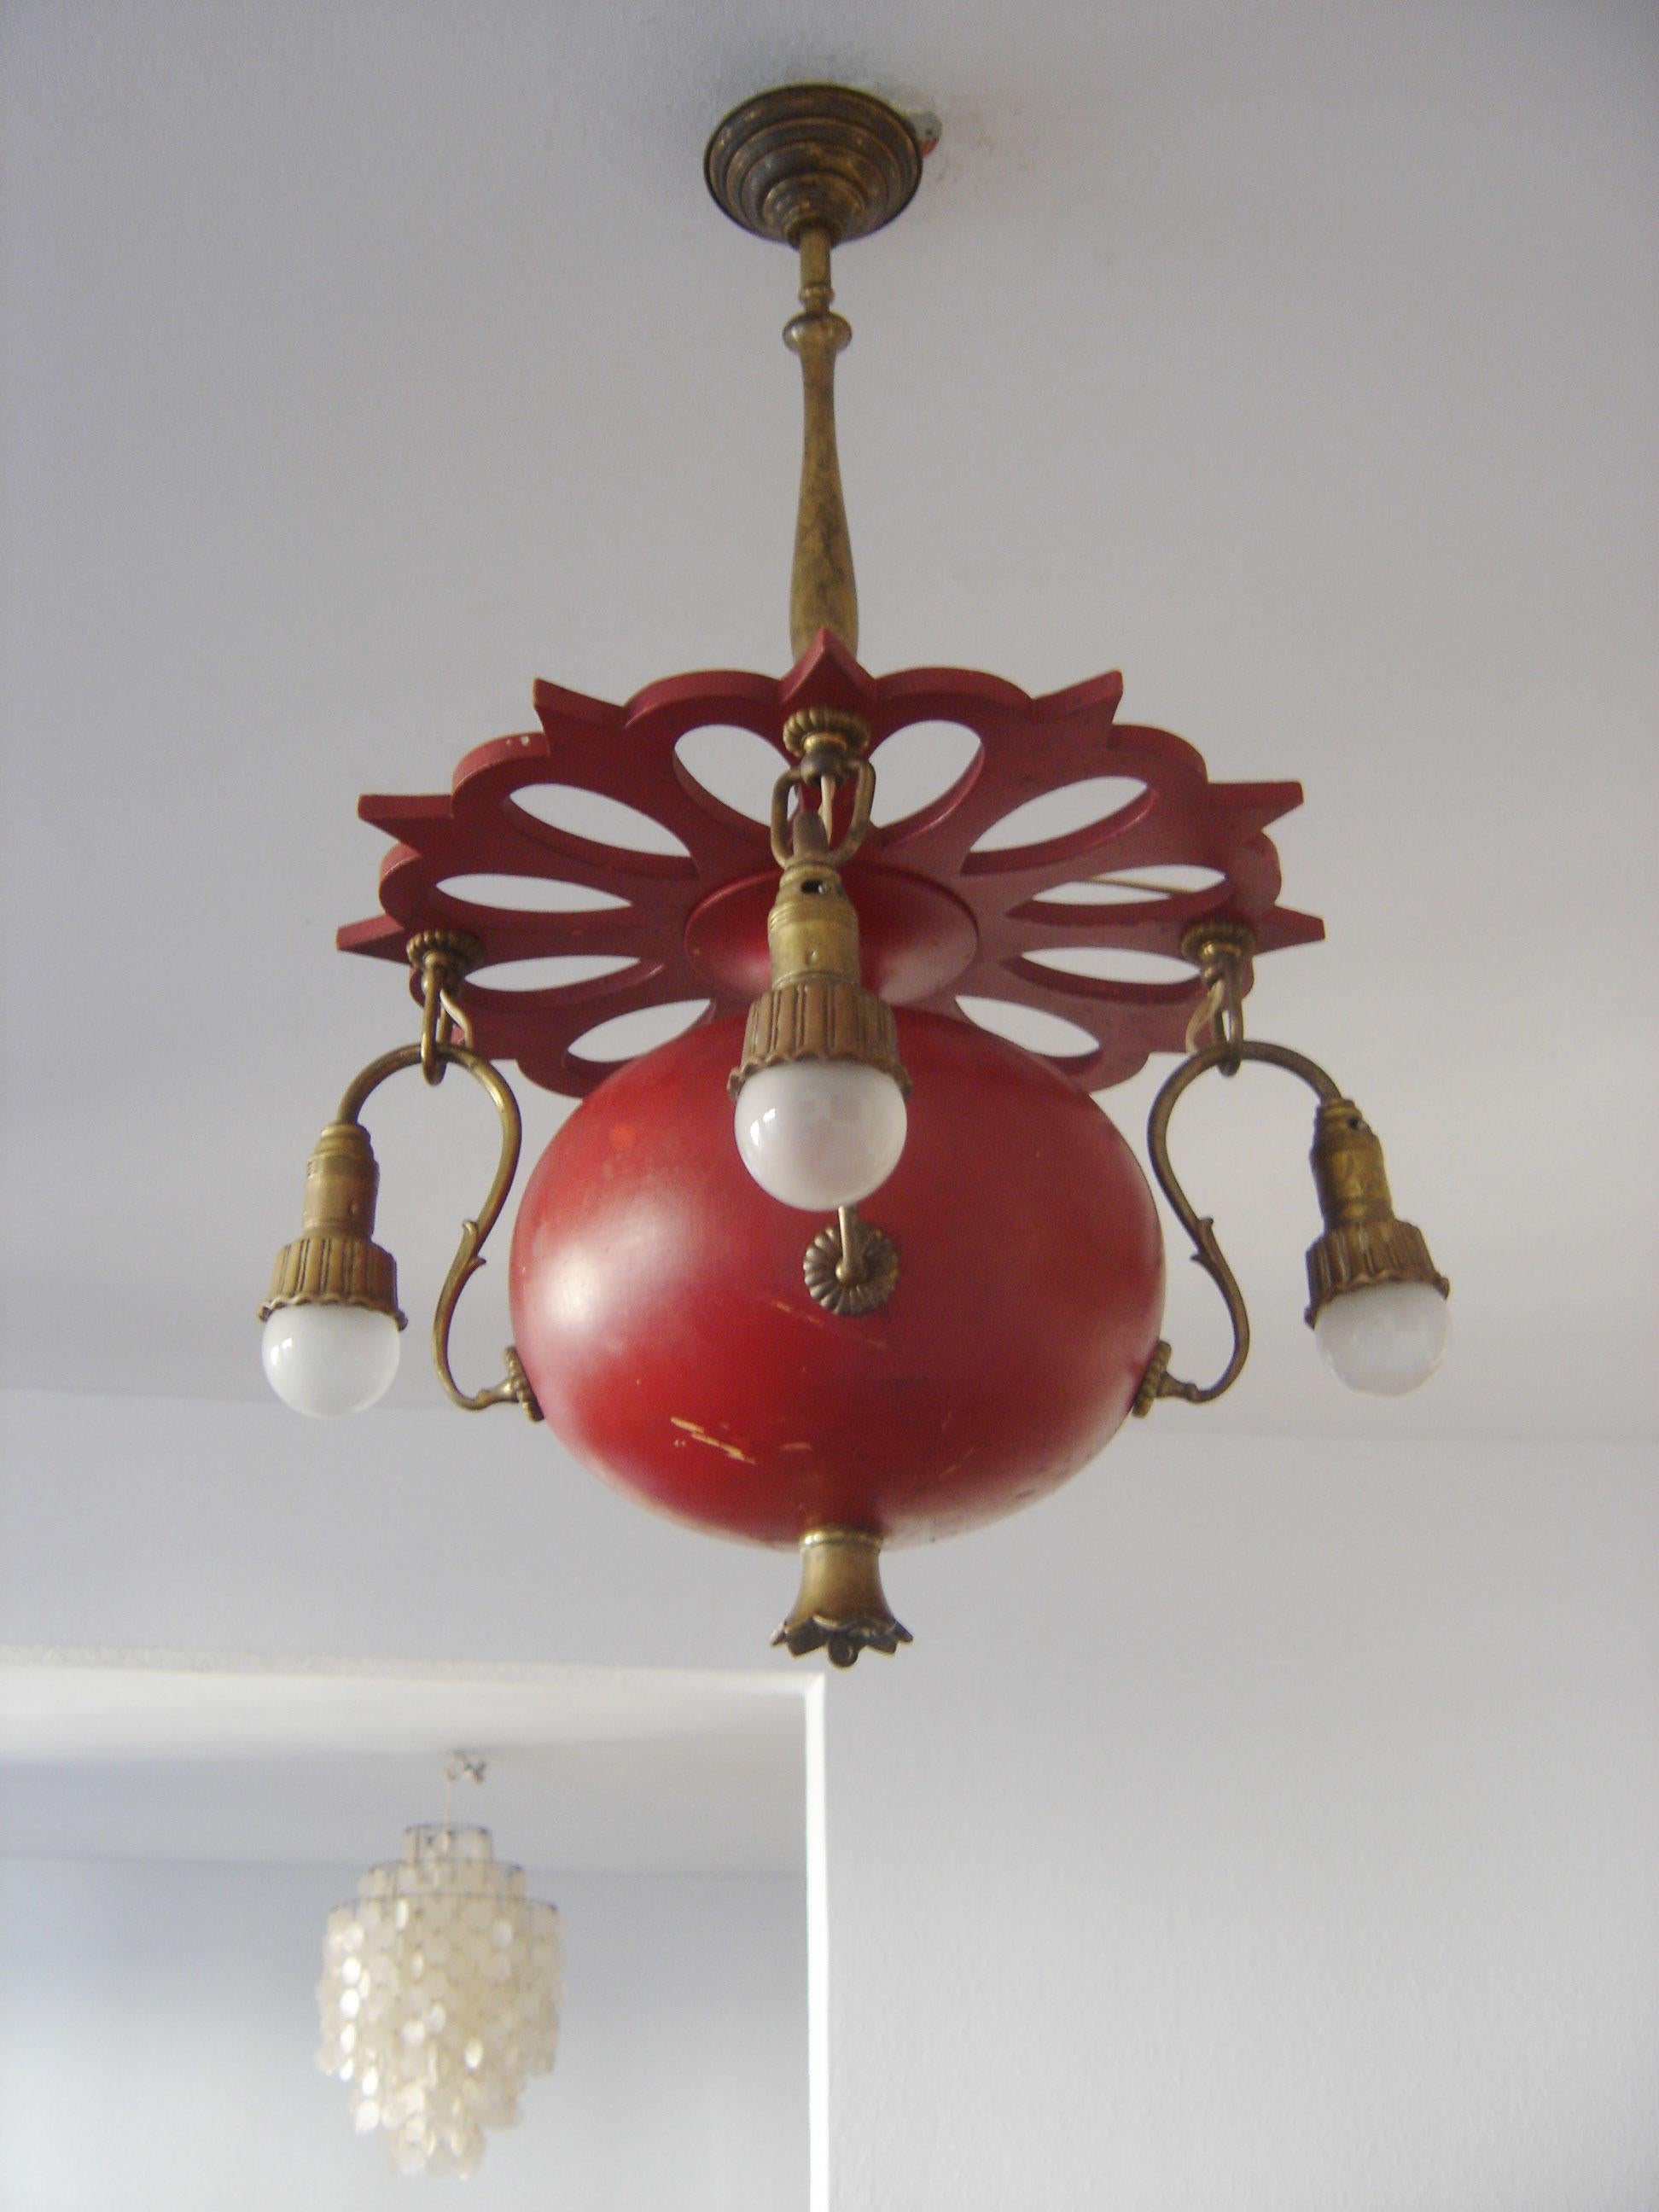 Early 20th Century Exceptional Art Nouveau Chandelier or Pendant Lamp 'Granate Apple', 1900 Germany For Sale